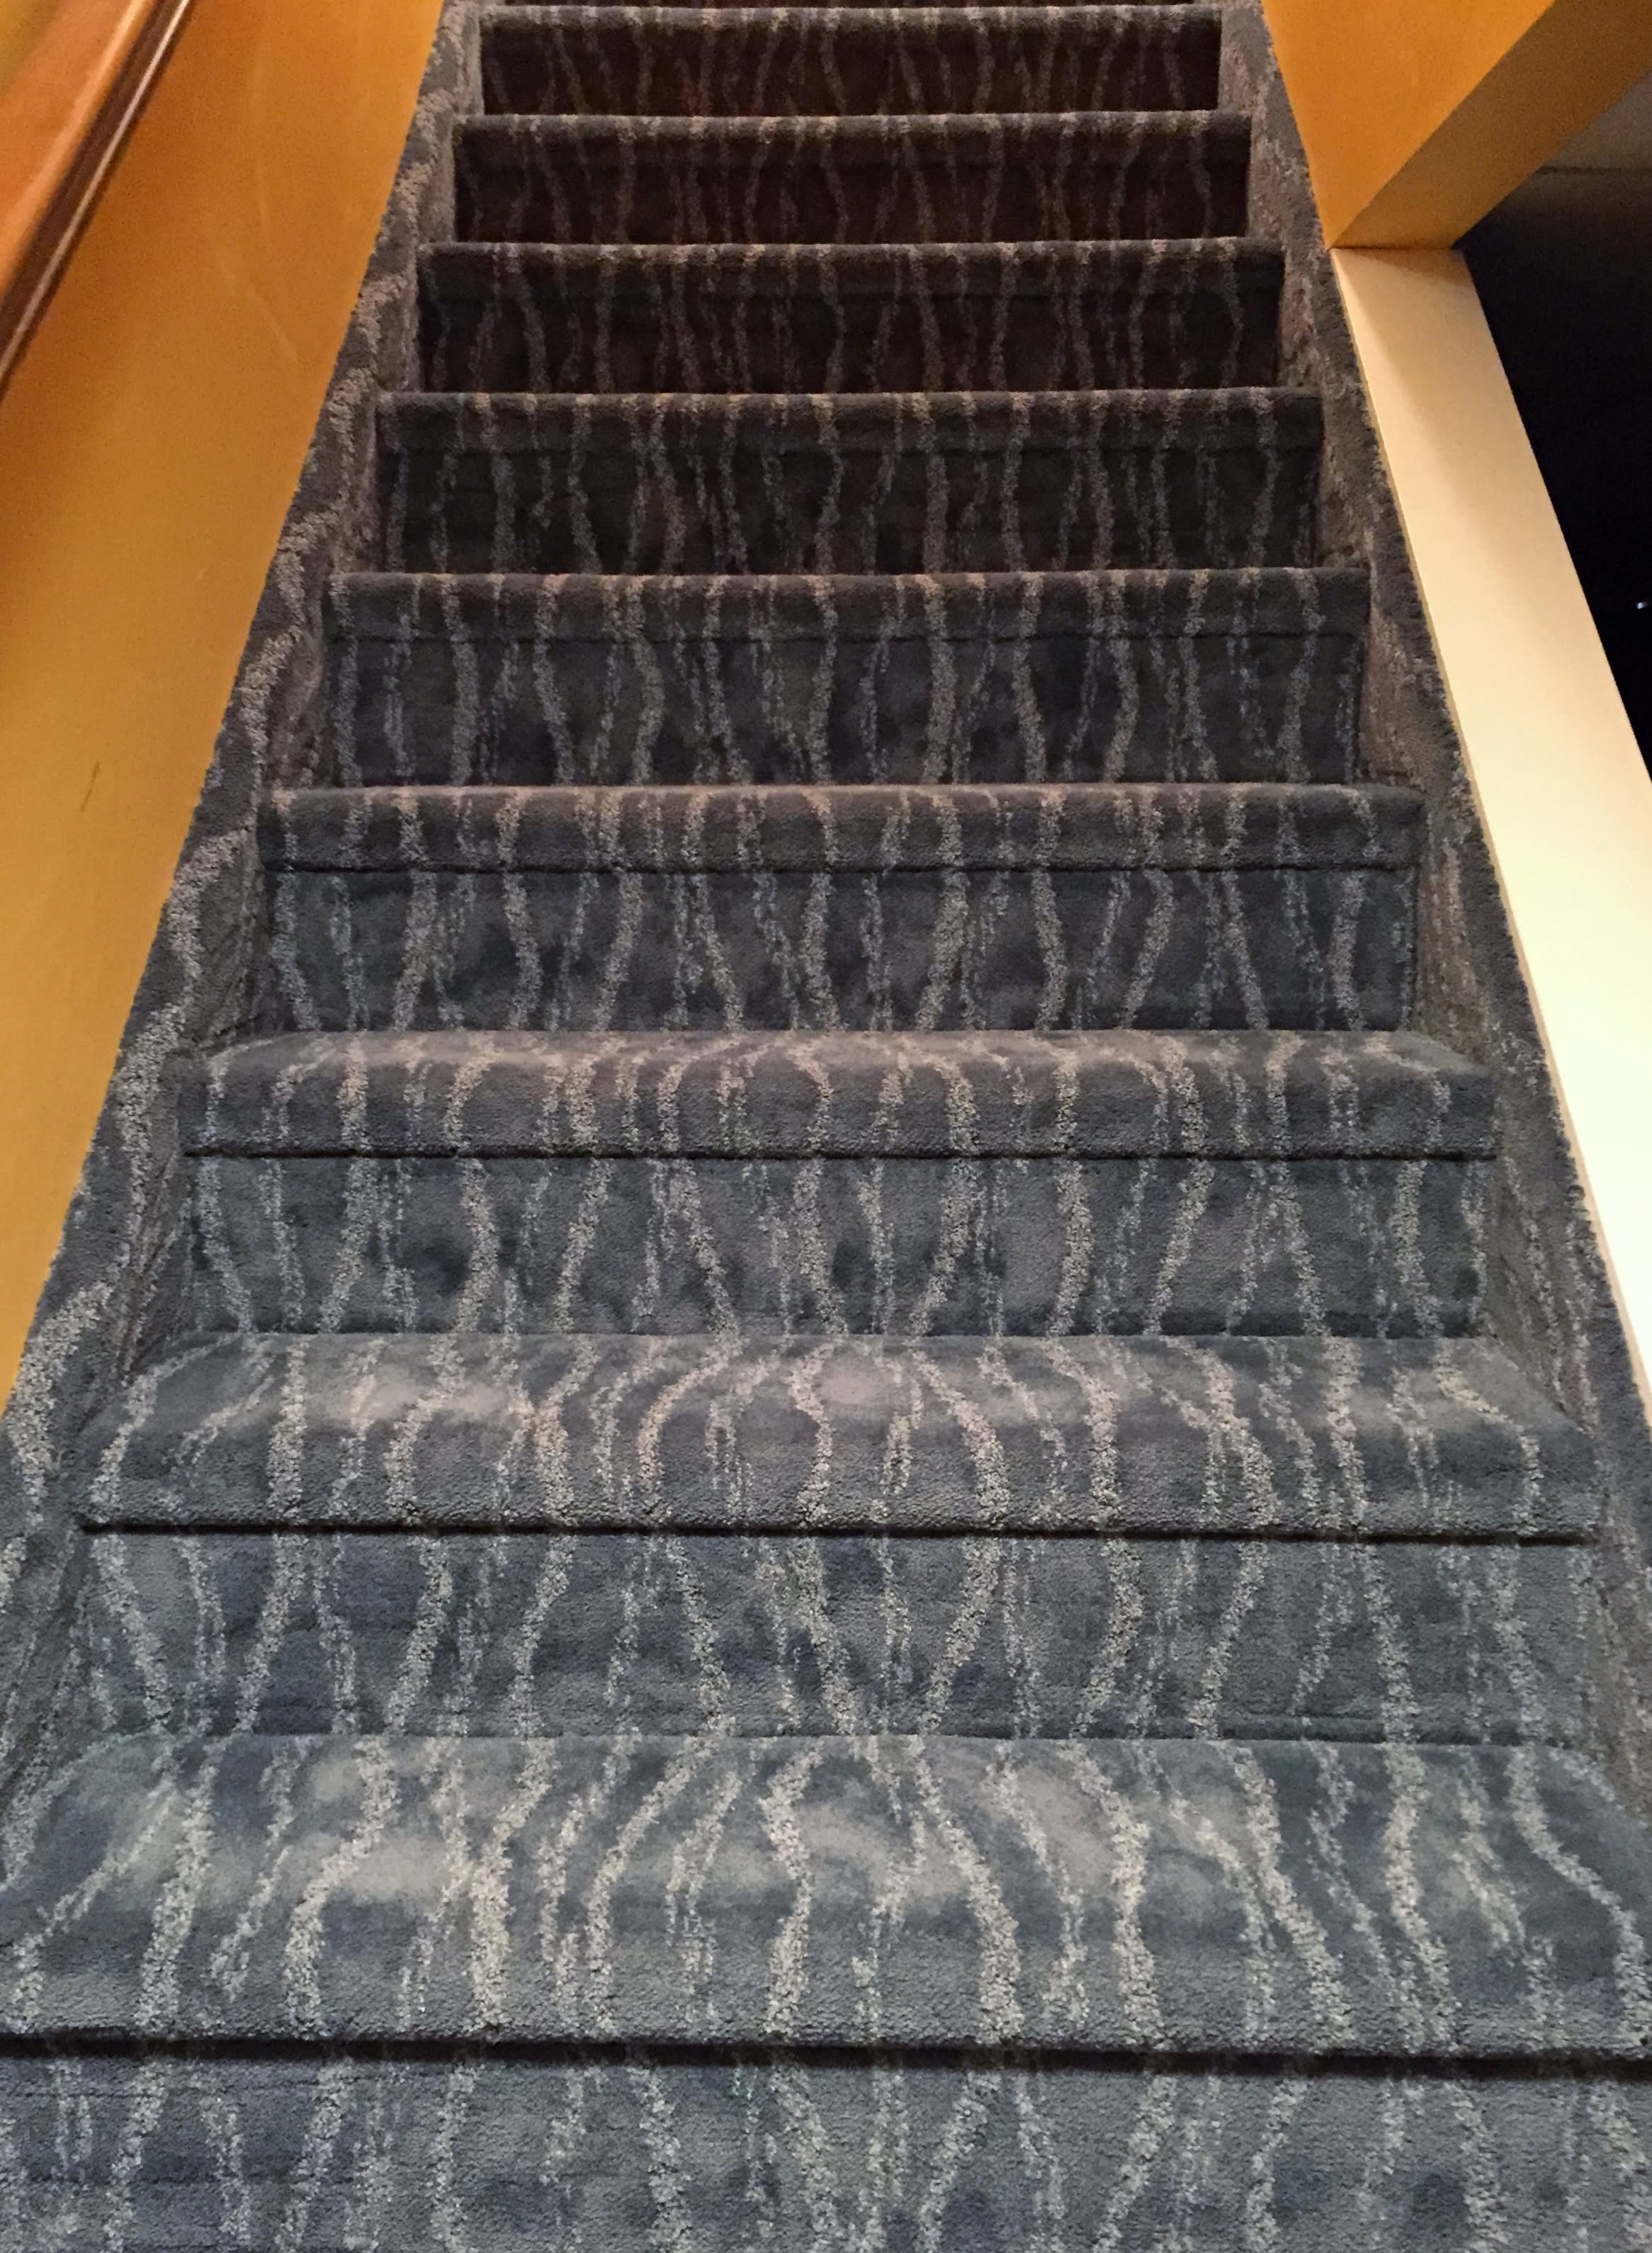 Residential carpet staircase from Independent Floor Covering located in Port Huron, MI